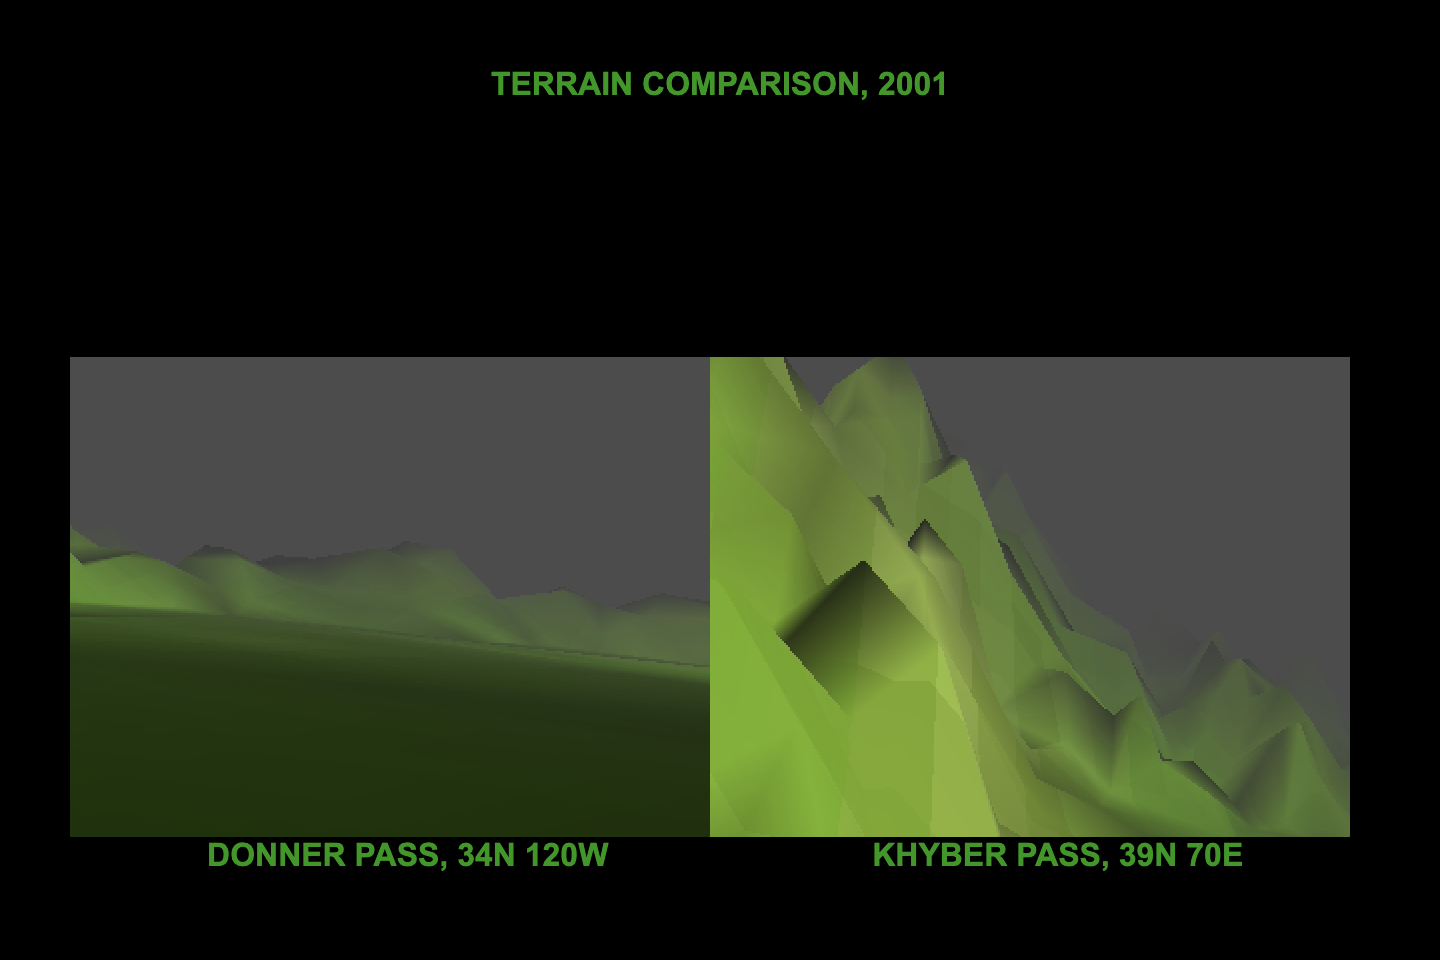 A black webpage with a title in neon green text, and two images of low poly computer generated landscapes side by side beneath, with the land in green and the sky a sort of purple.